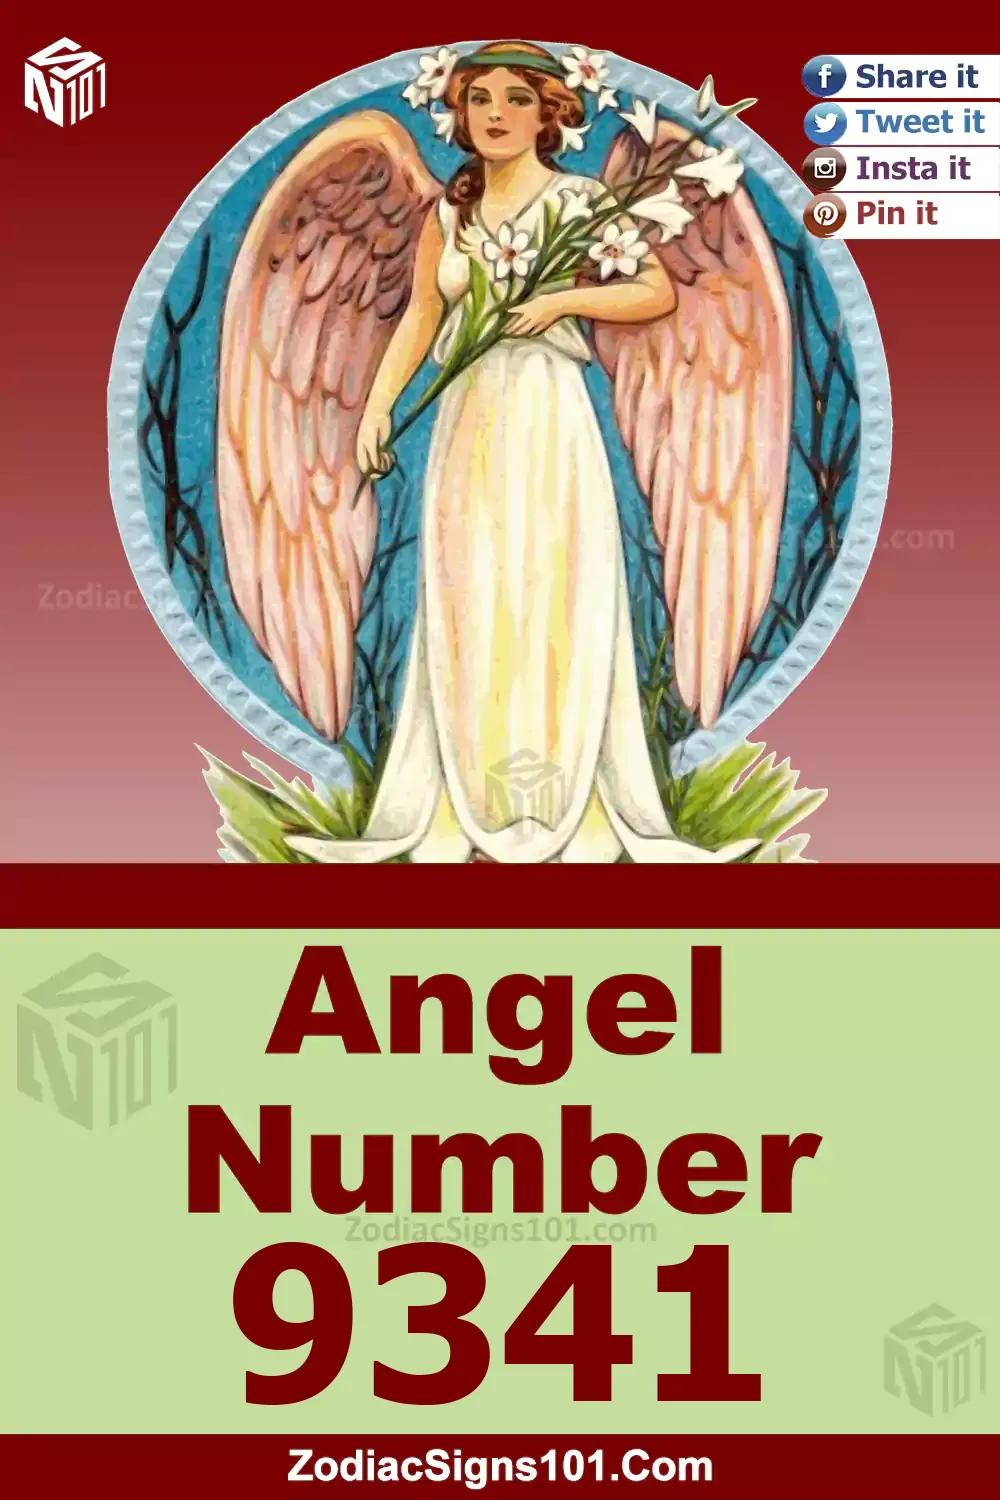 9341 Angel Number Meaning